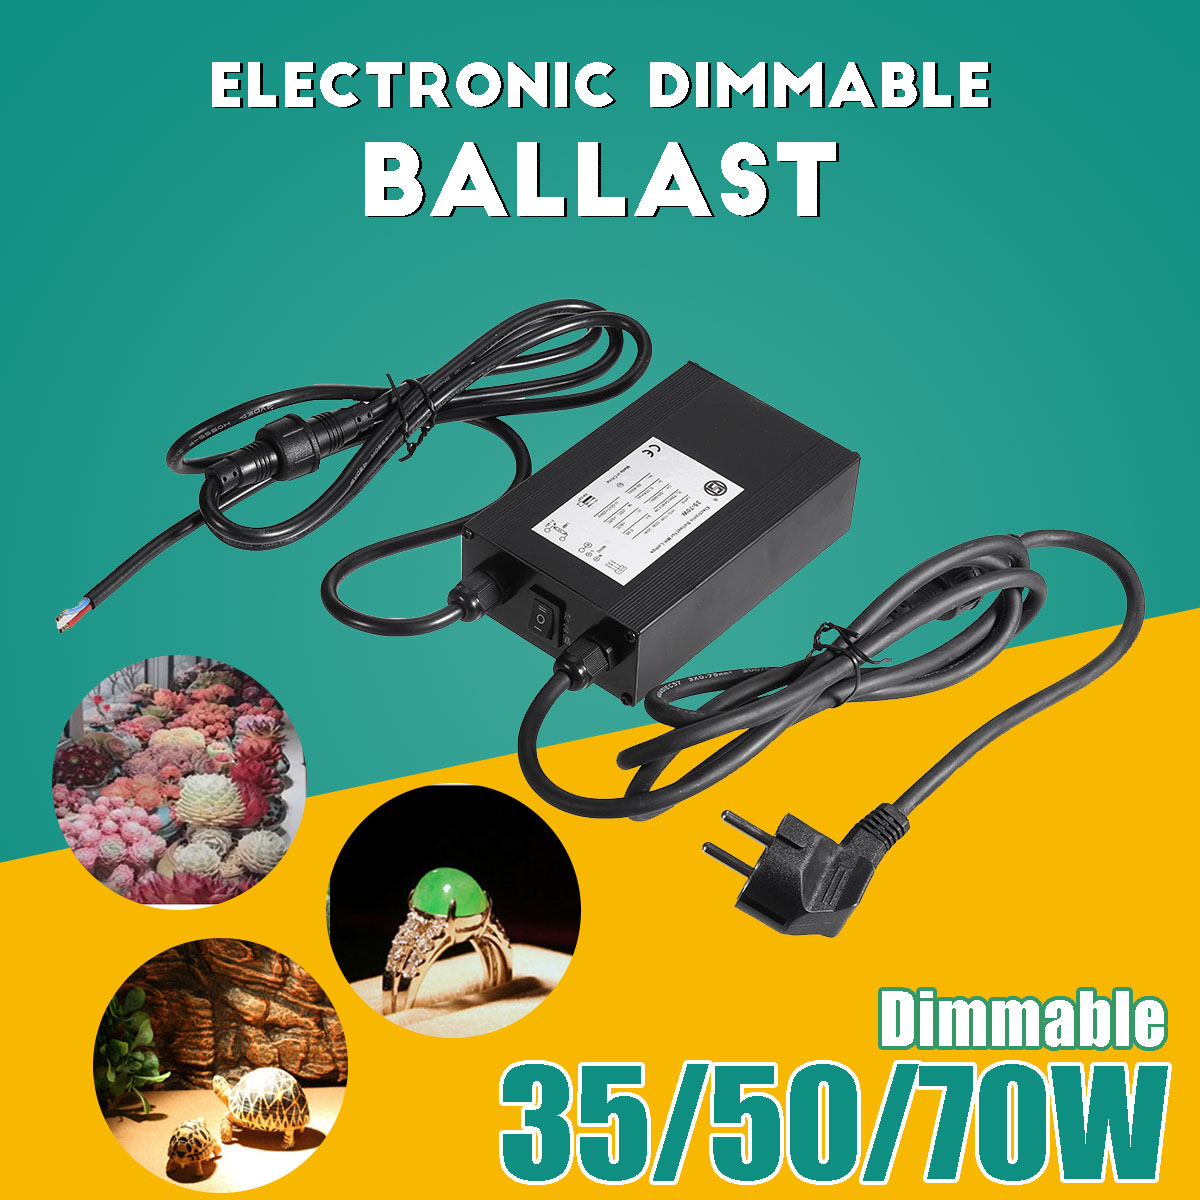 Wide-Voltage-Electronic-Dimmable-Ballast-for-70W-Reptile-UVB-Lamp-355070W-Dimmable-1772084-1